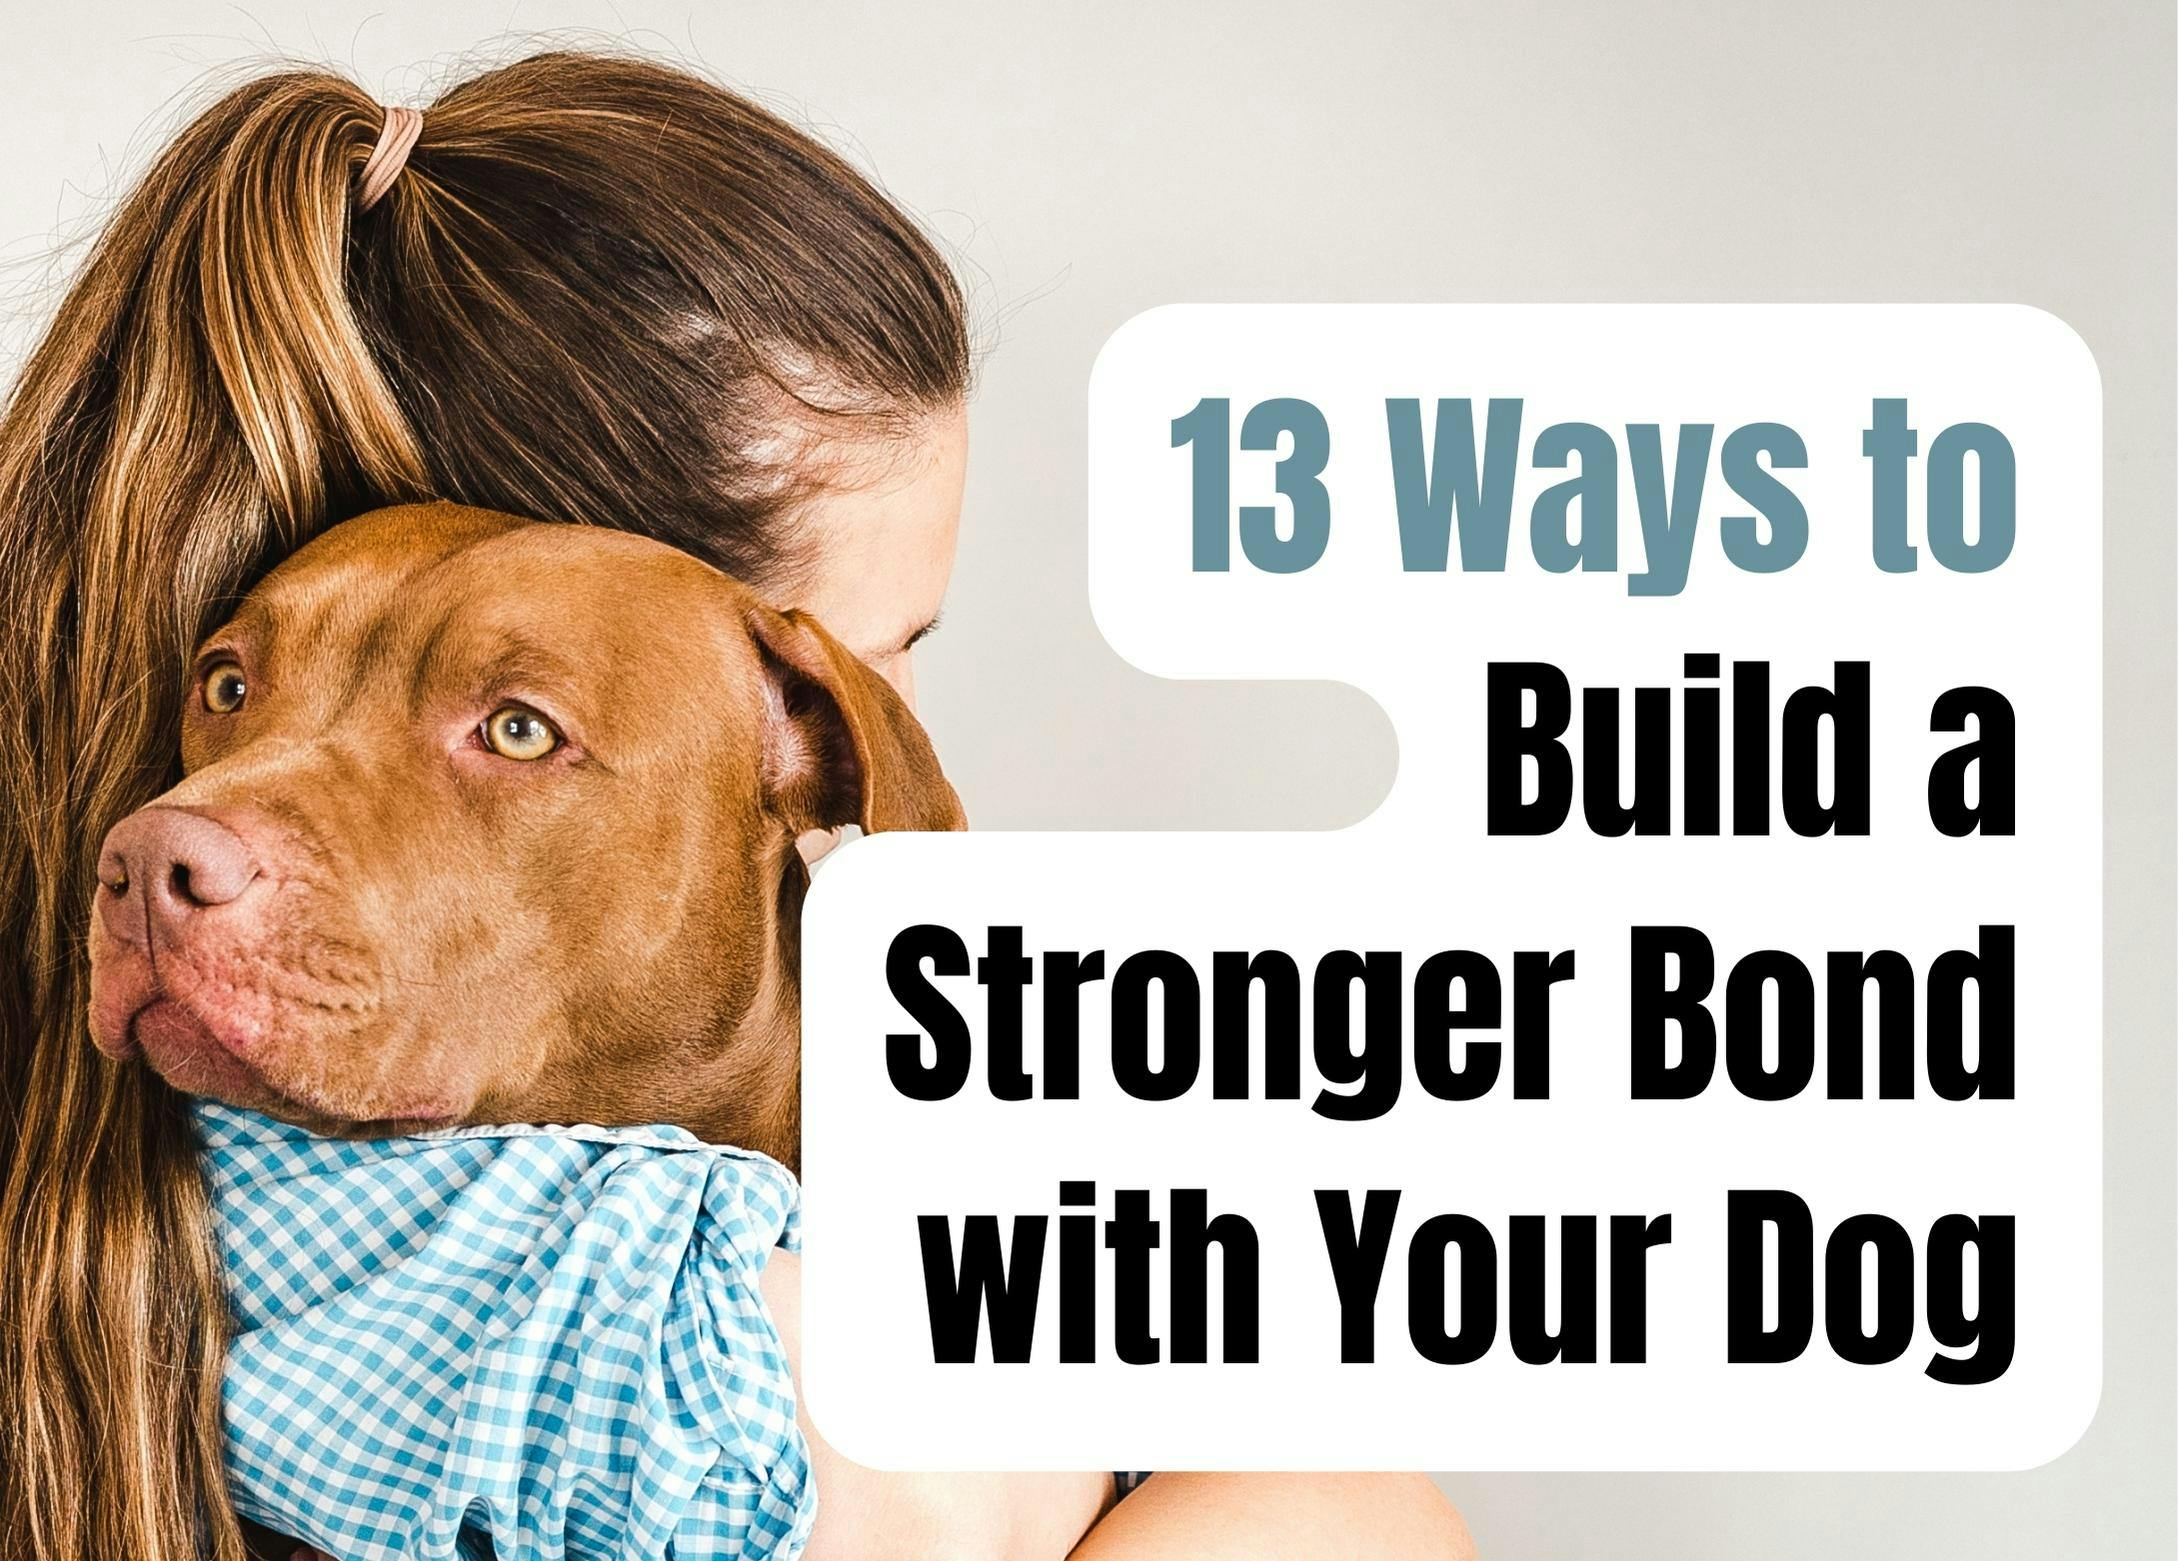 How to Strengthen Your Bond With Your Dog: 13 Tips